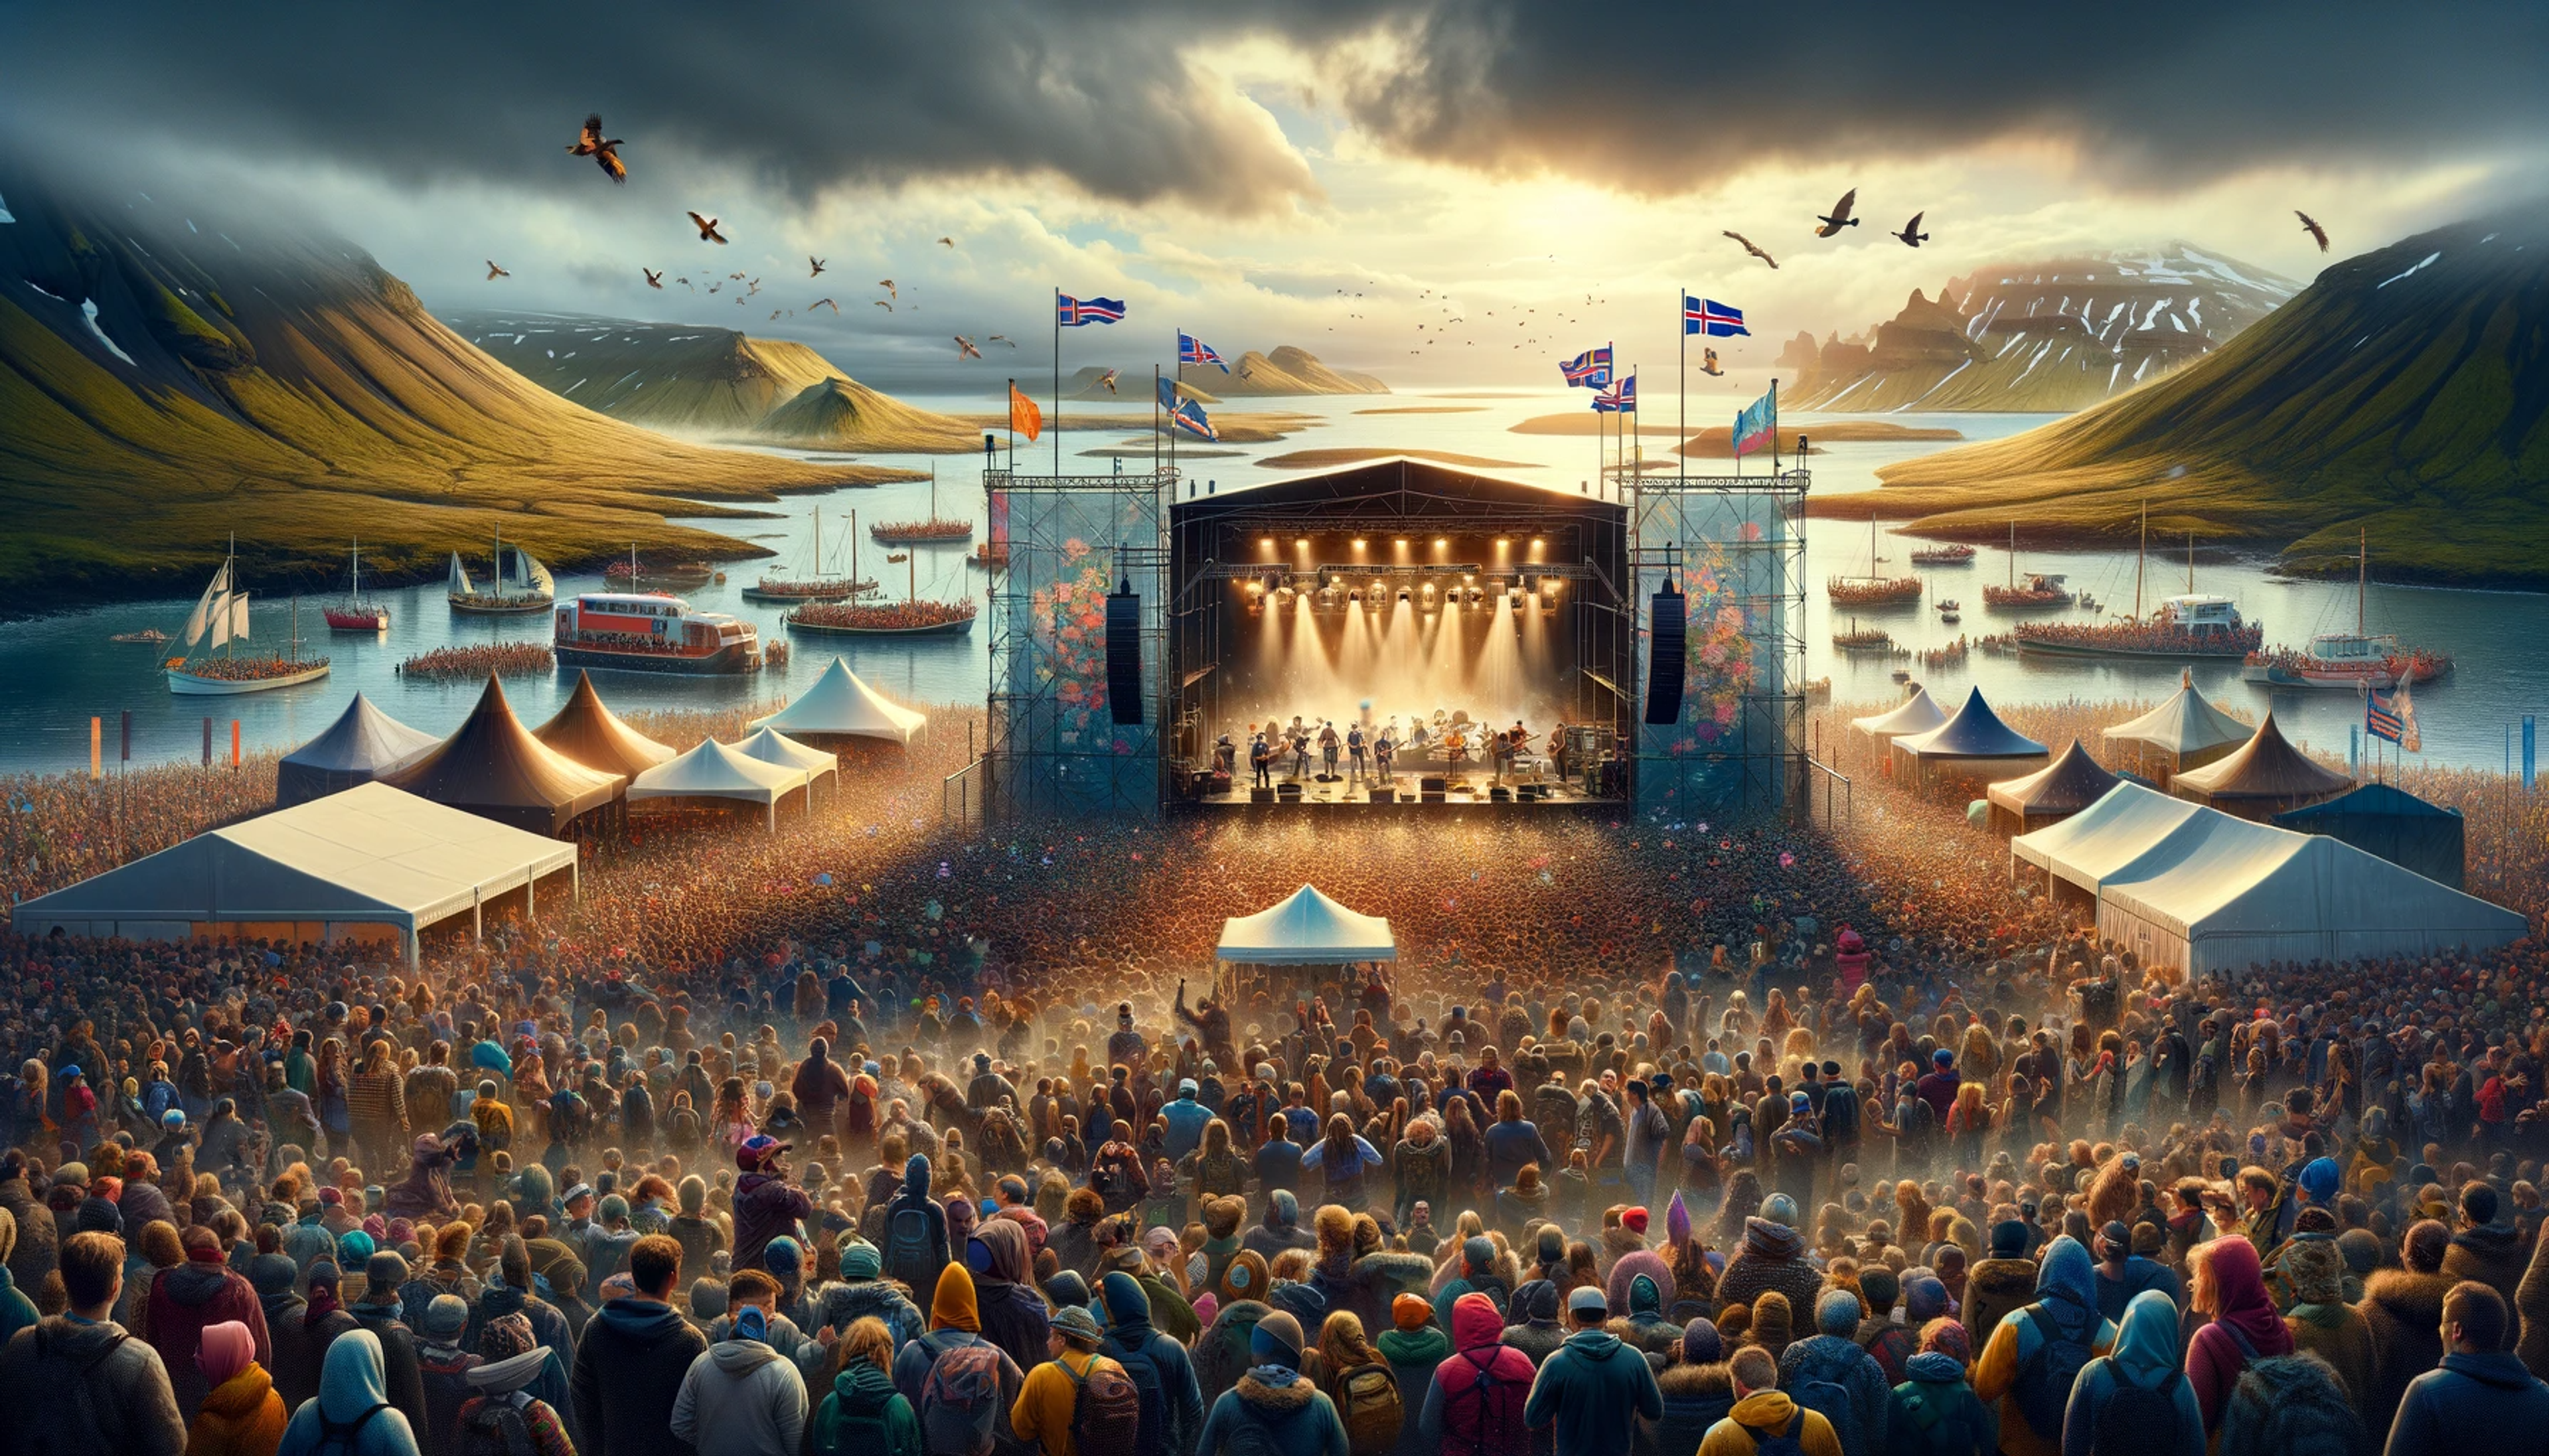 Icelandic music festival in July during the warmest and driest months of the year.